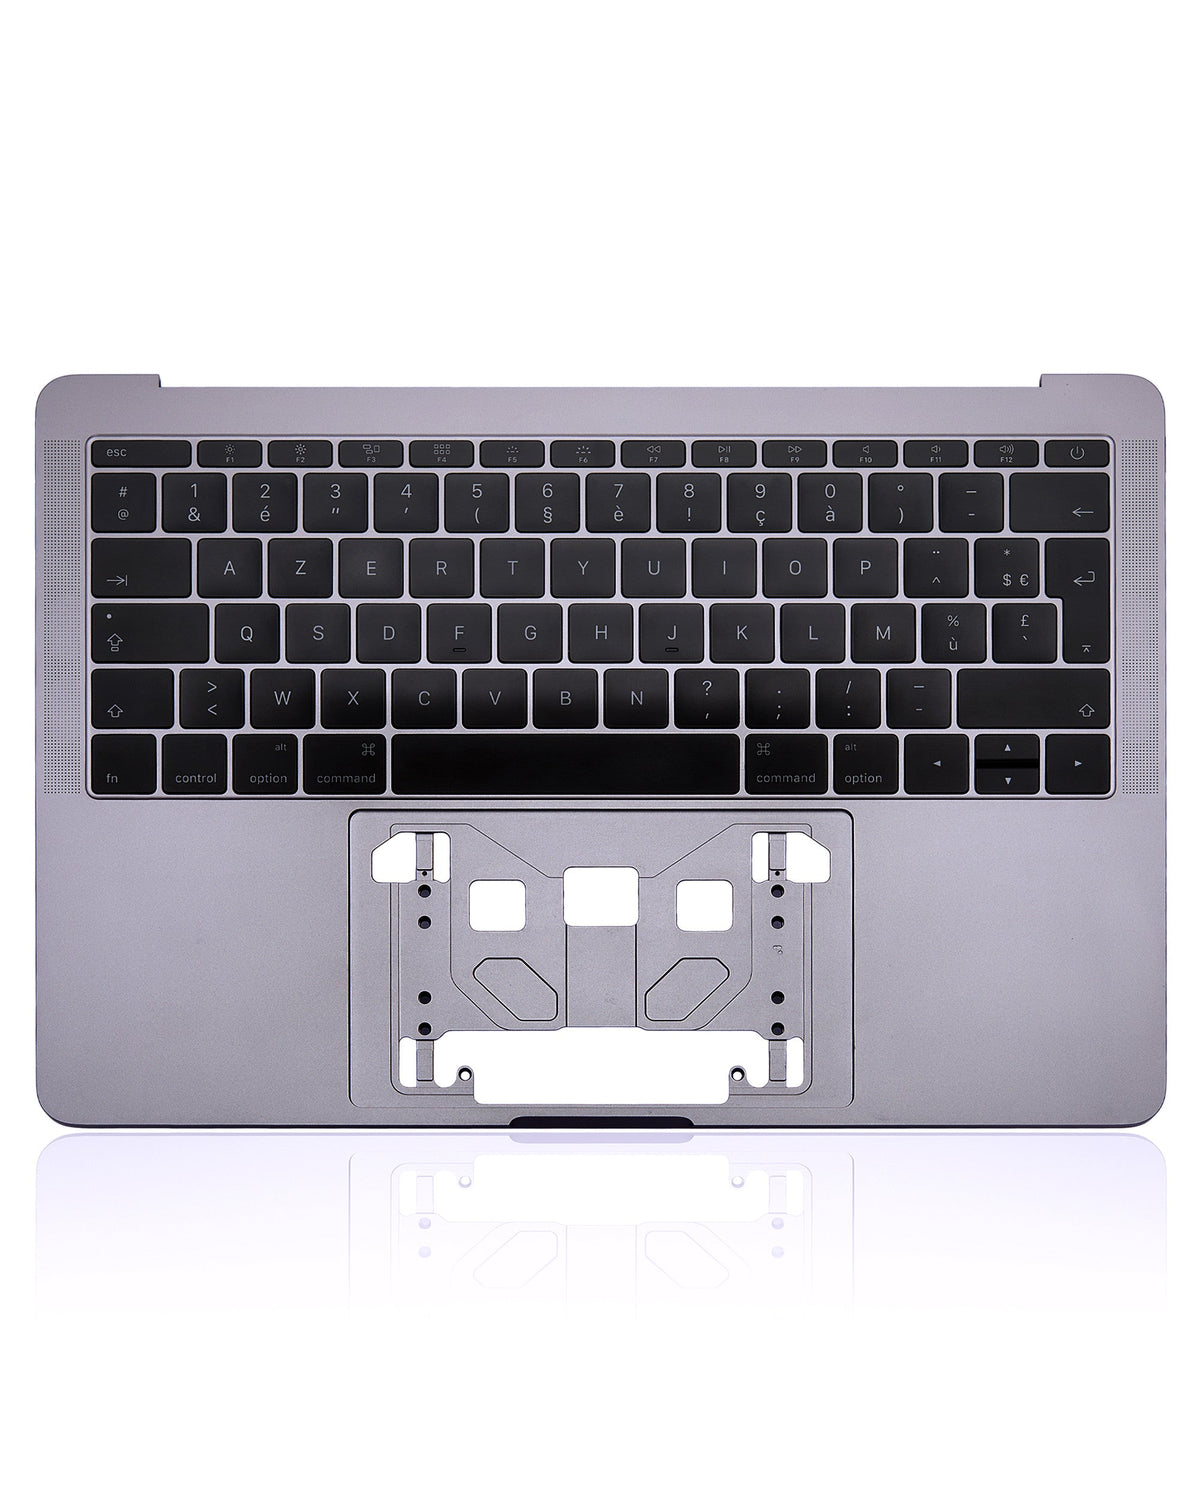 SPACE GRAY TOP CASE WITH FRENCH ENGLISH KEYBOARD FOR MACBOOK PRO 13" A1708 (LATE 2016-MID 2017)